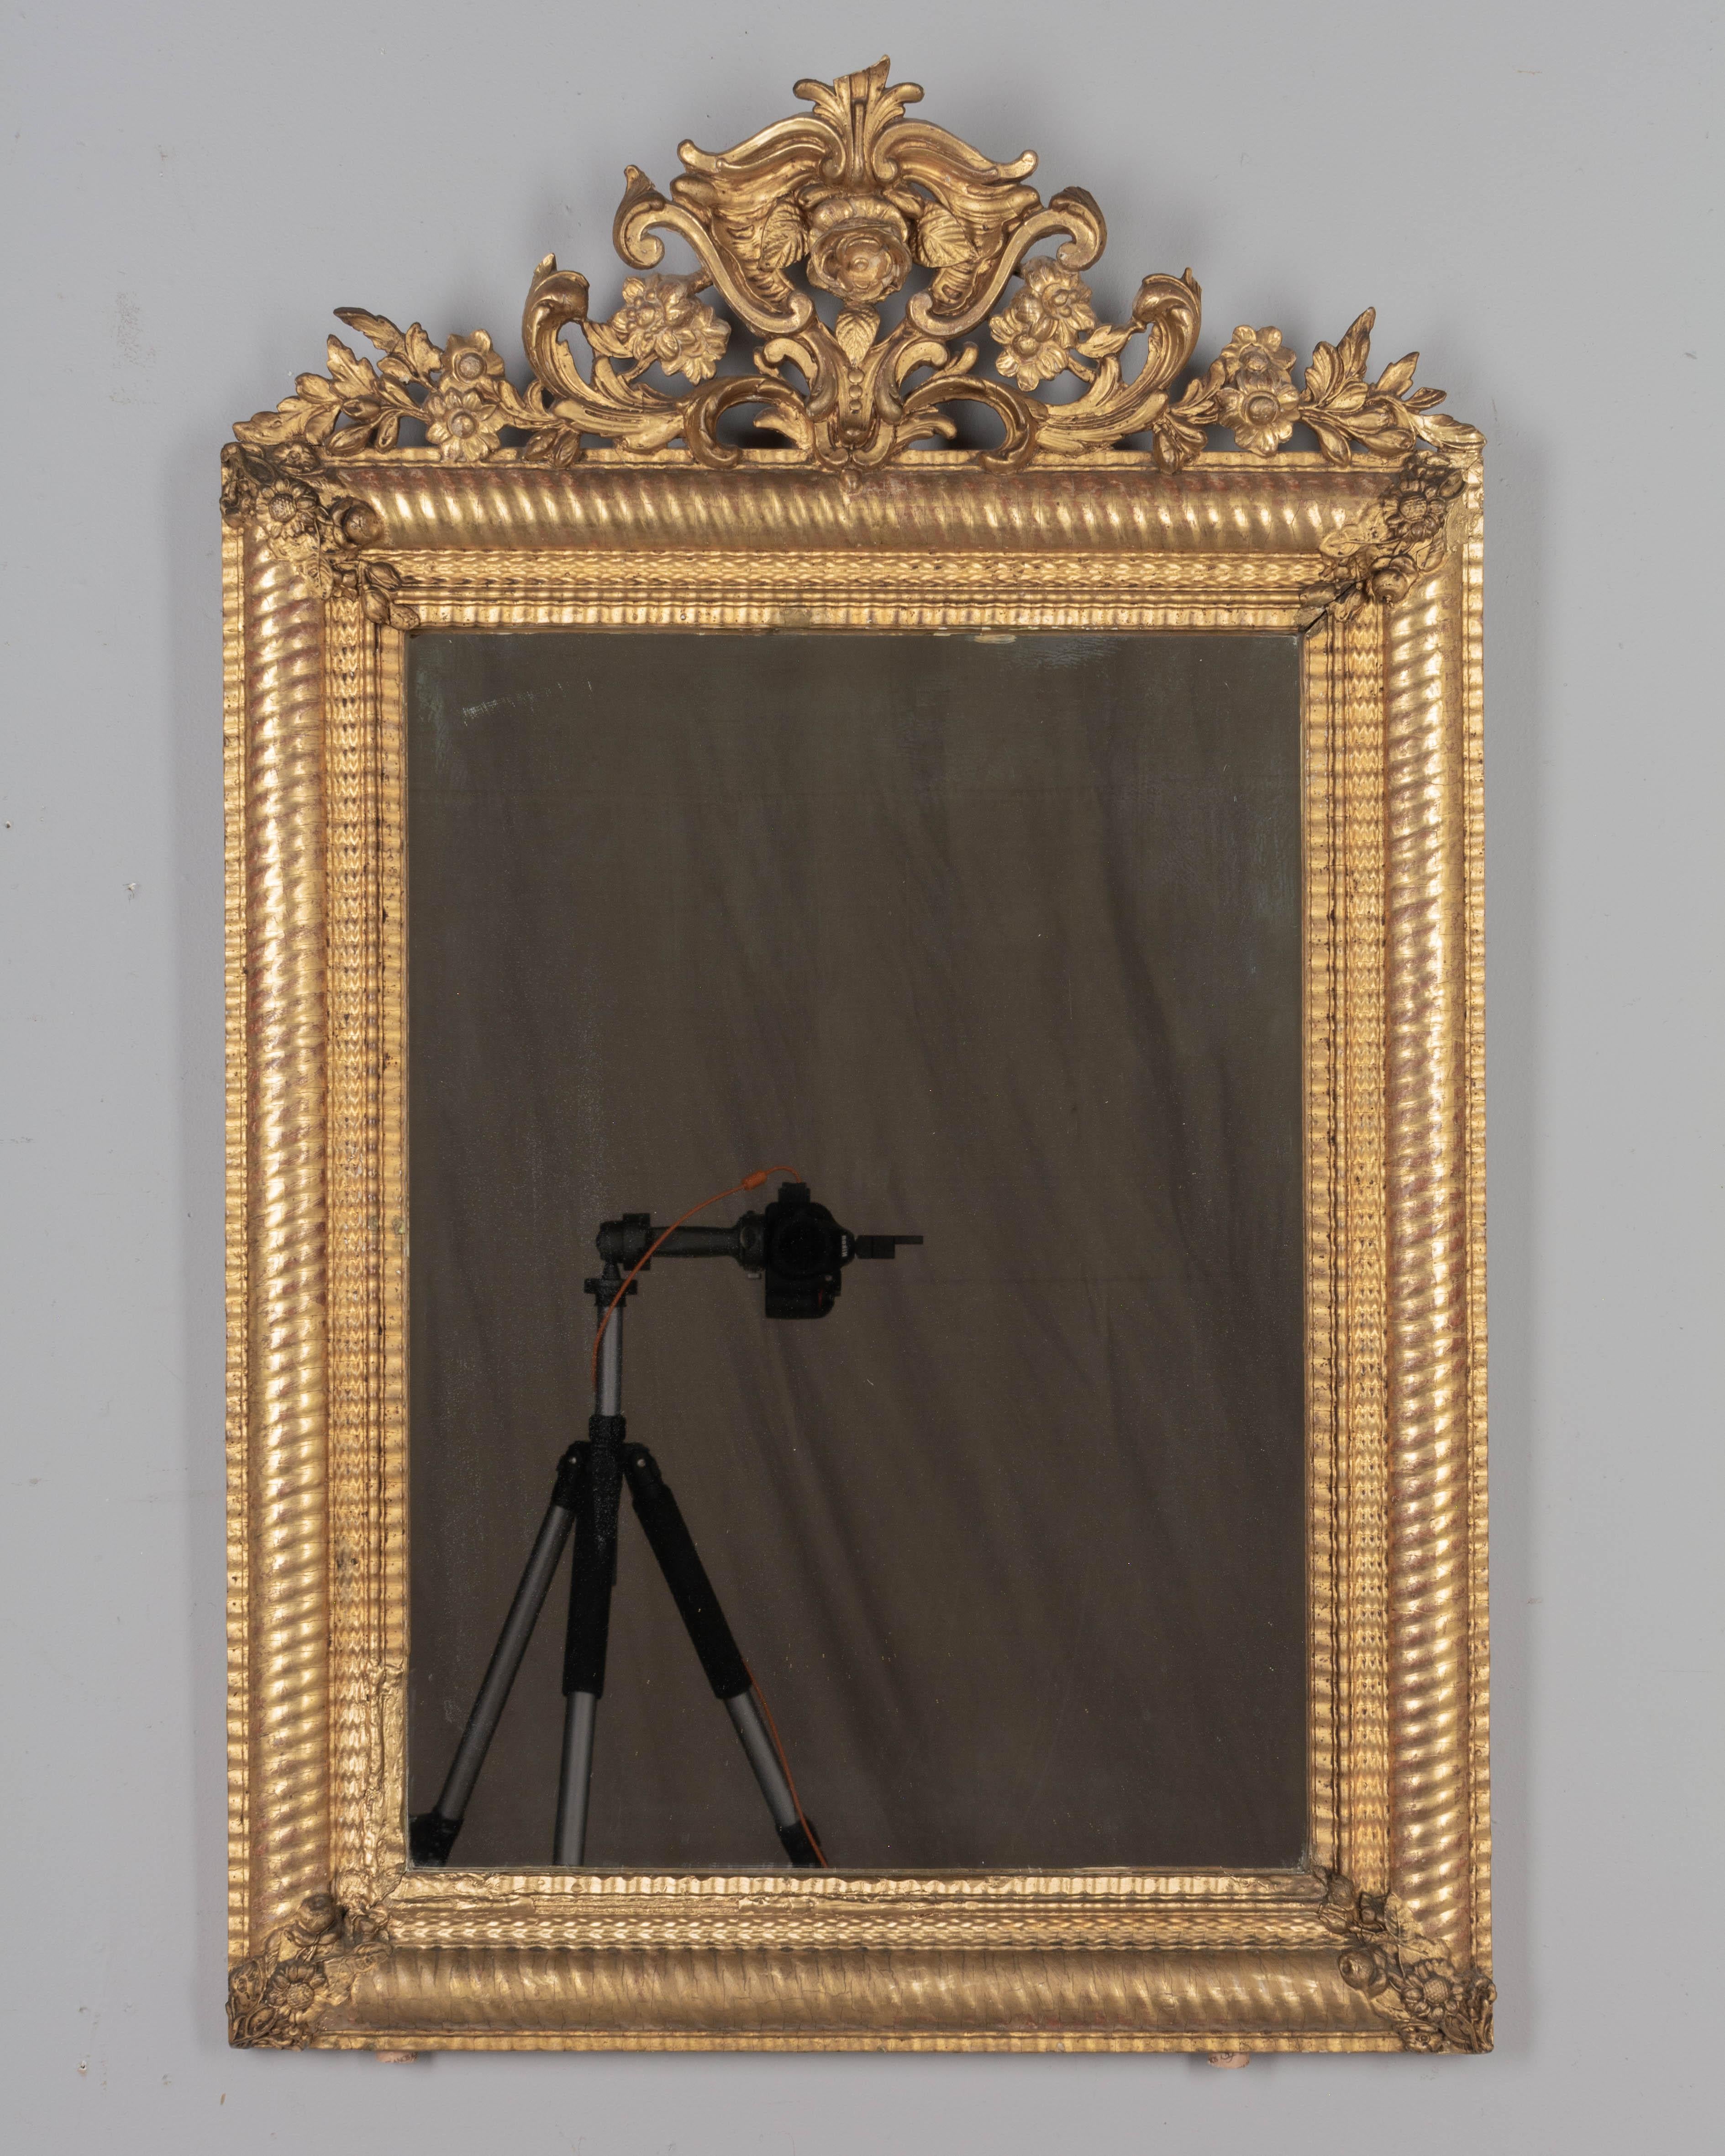 A 19th century Louis XV style gilded mirror with a sculptural floral crest and corner decorations. Nice three dimensional details. Warm gilt finish with some losses and touch-ups. Original mirror. Restorations on the left inner border of frame and